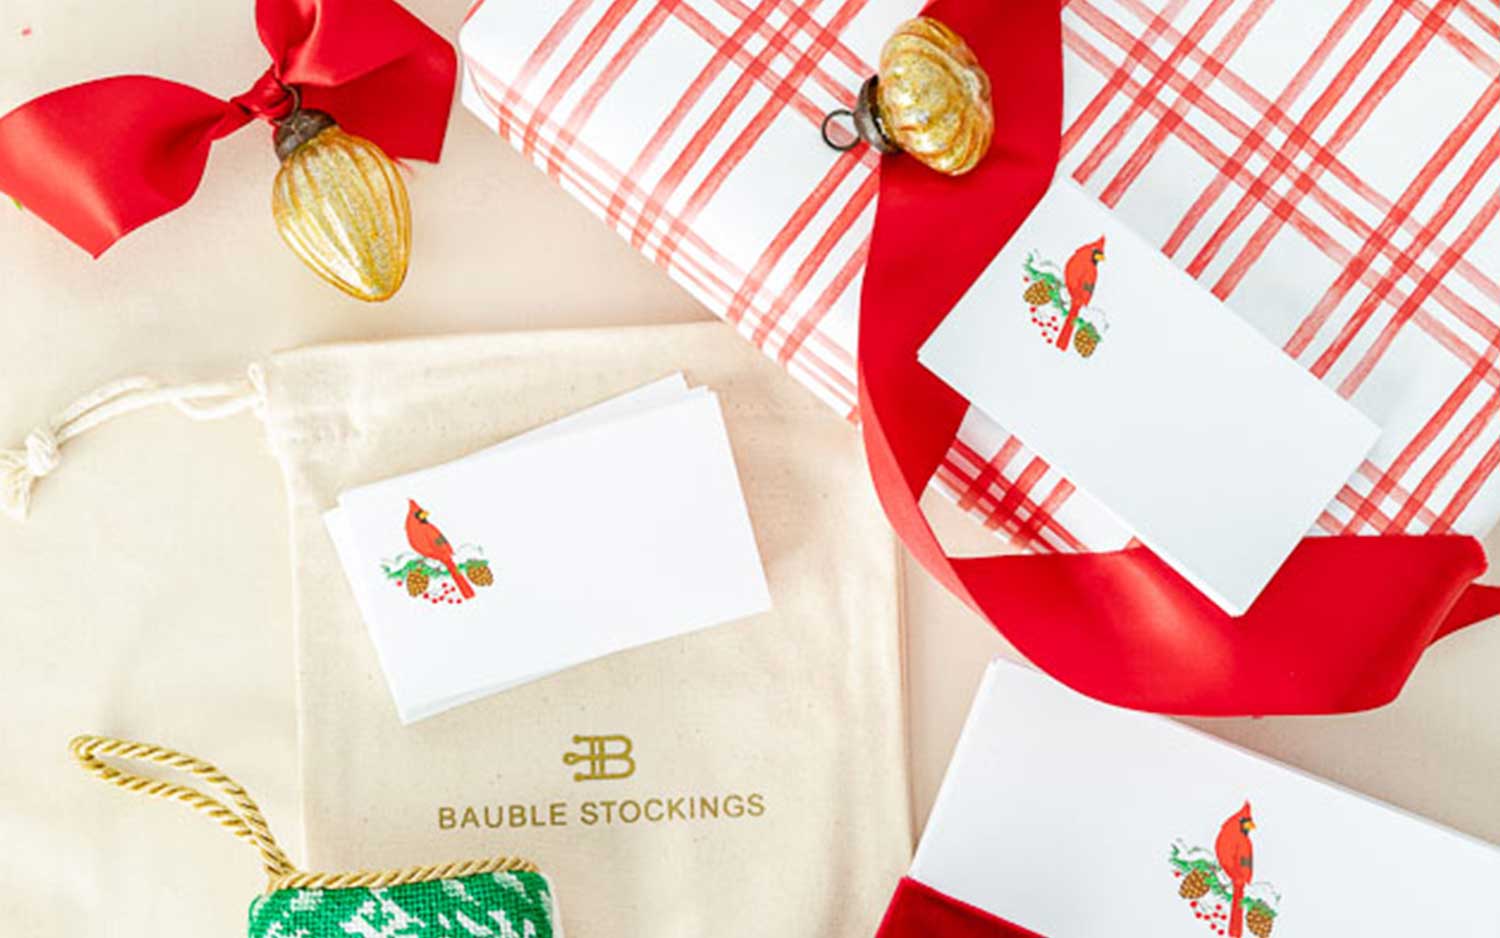 The Bauble Stockings Story and an Exclusive Giveaway